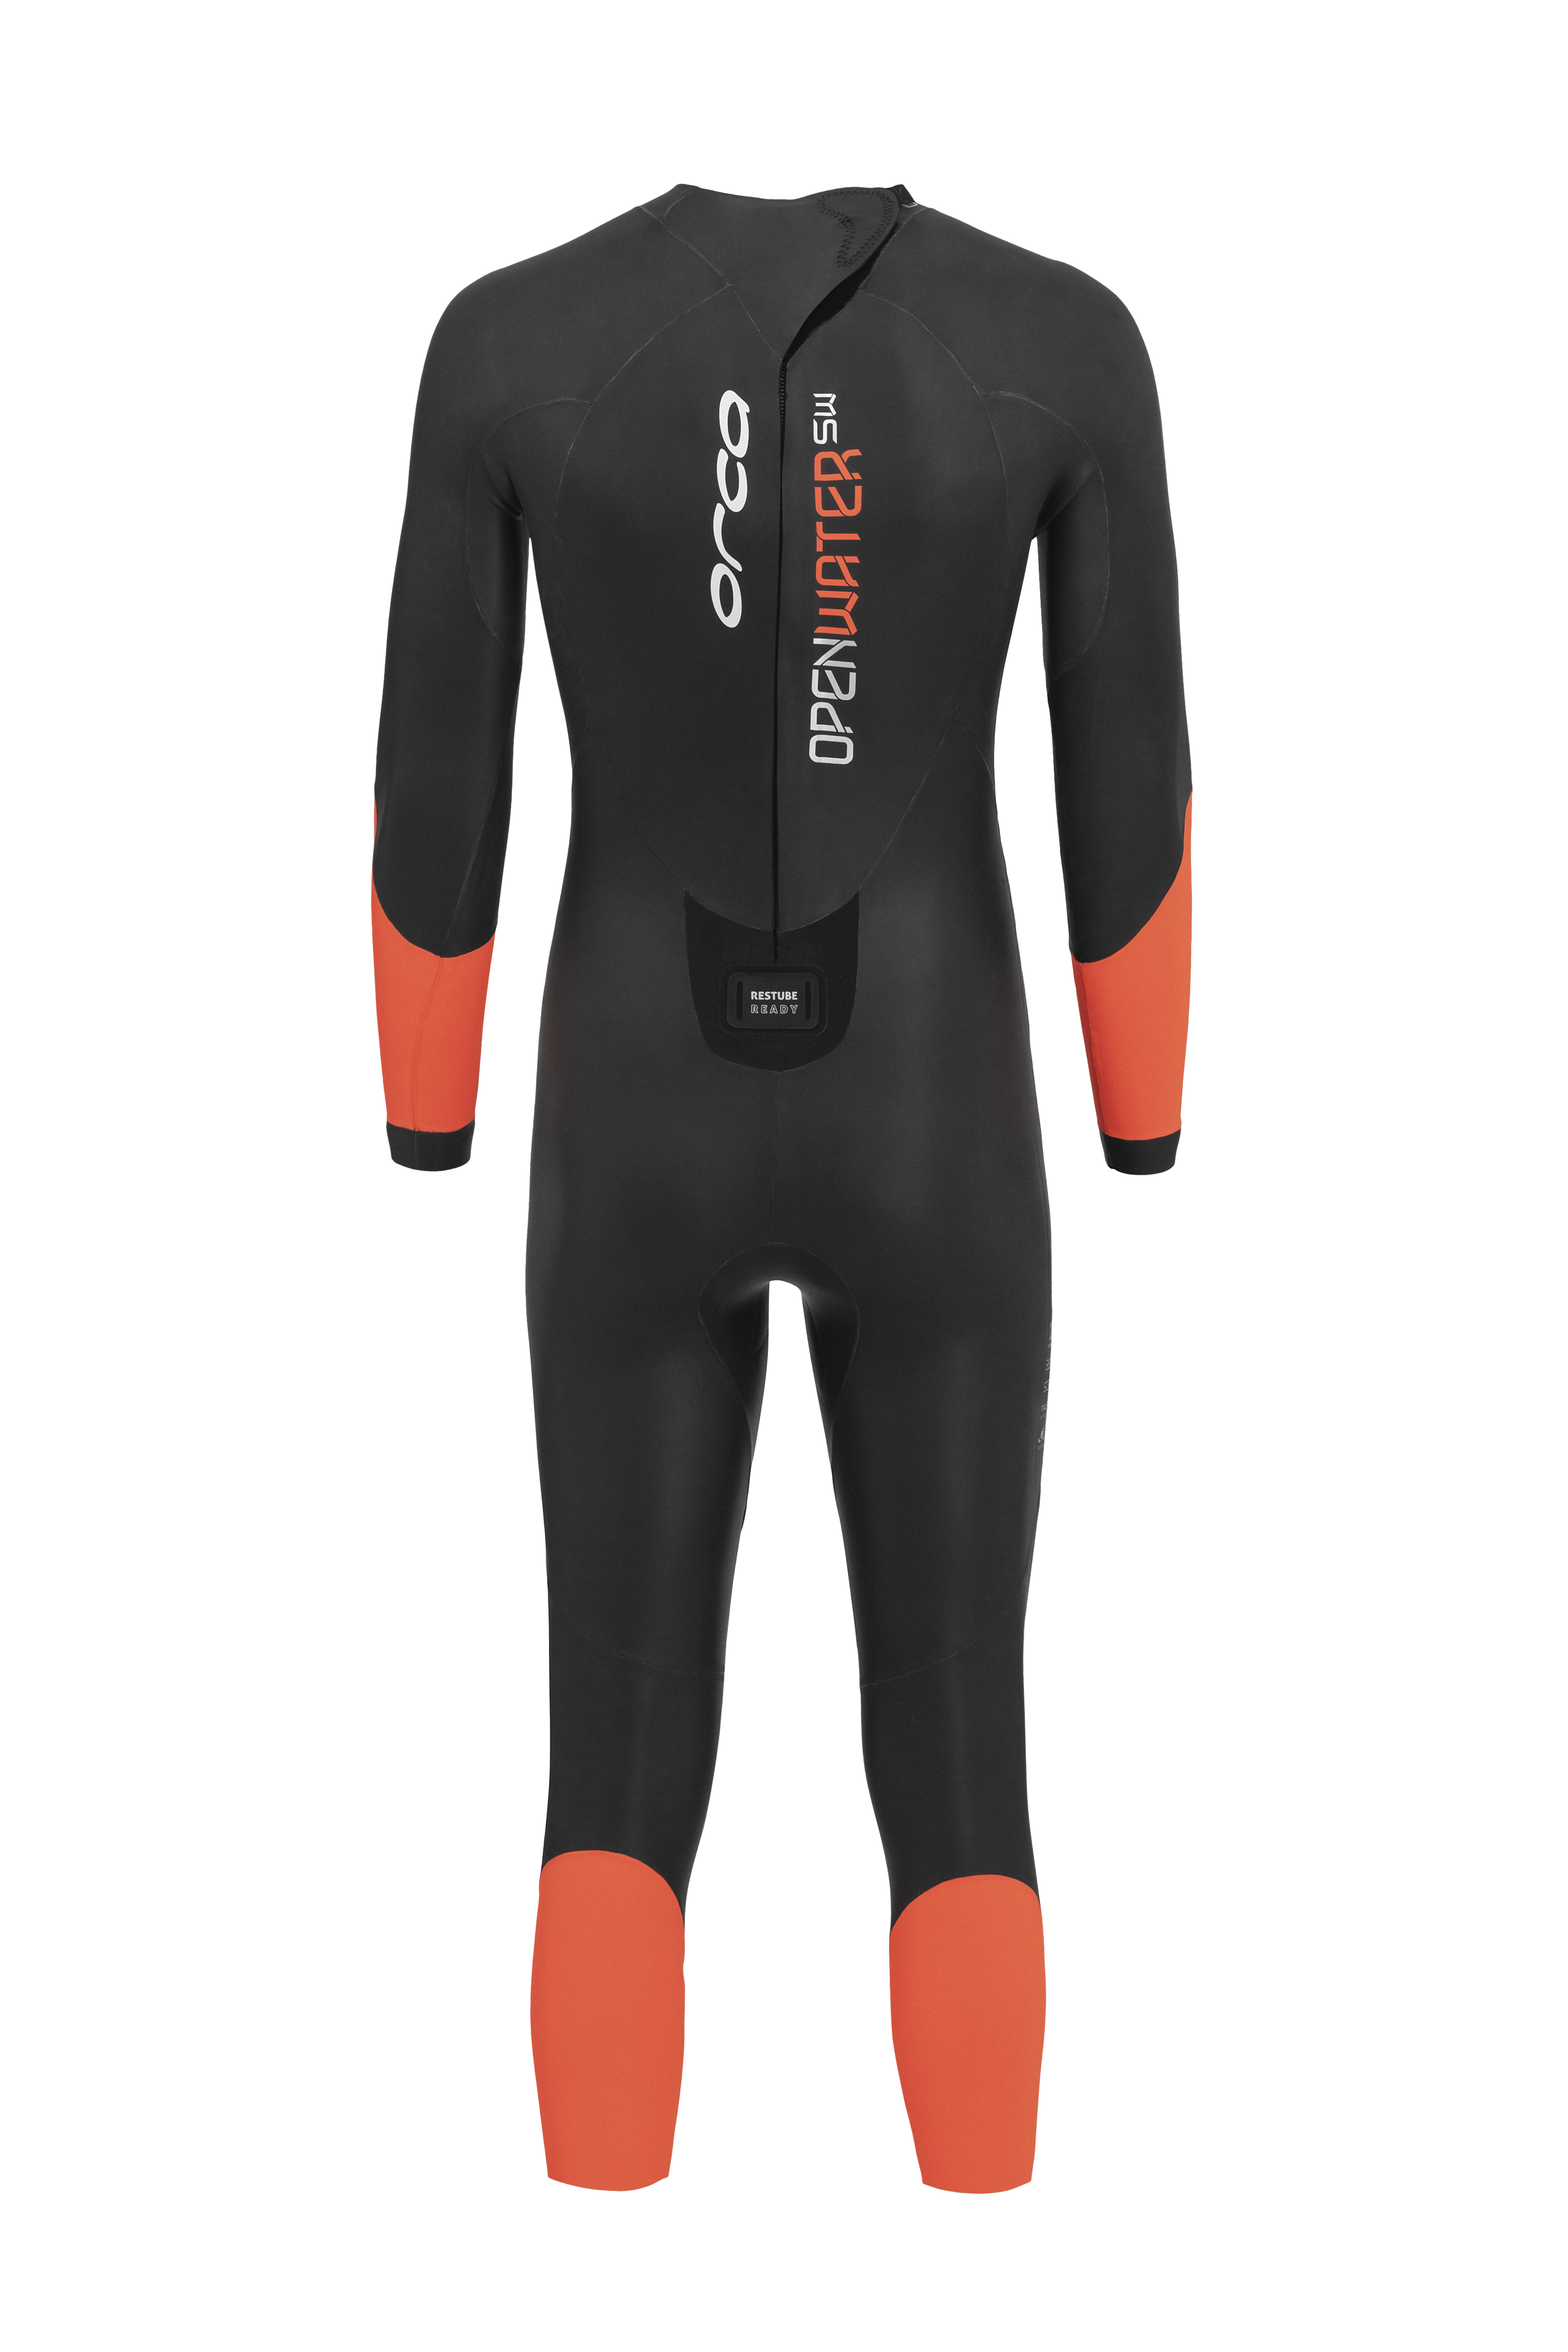 orca Ocean Swimming Openwater RS1 SW Mens Wetsuit